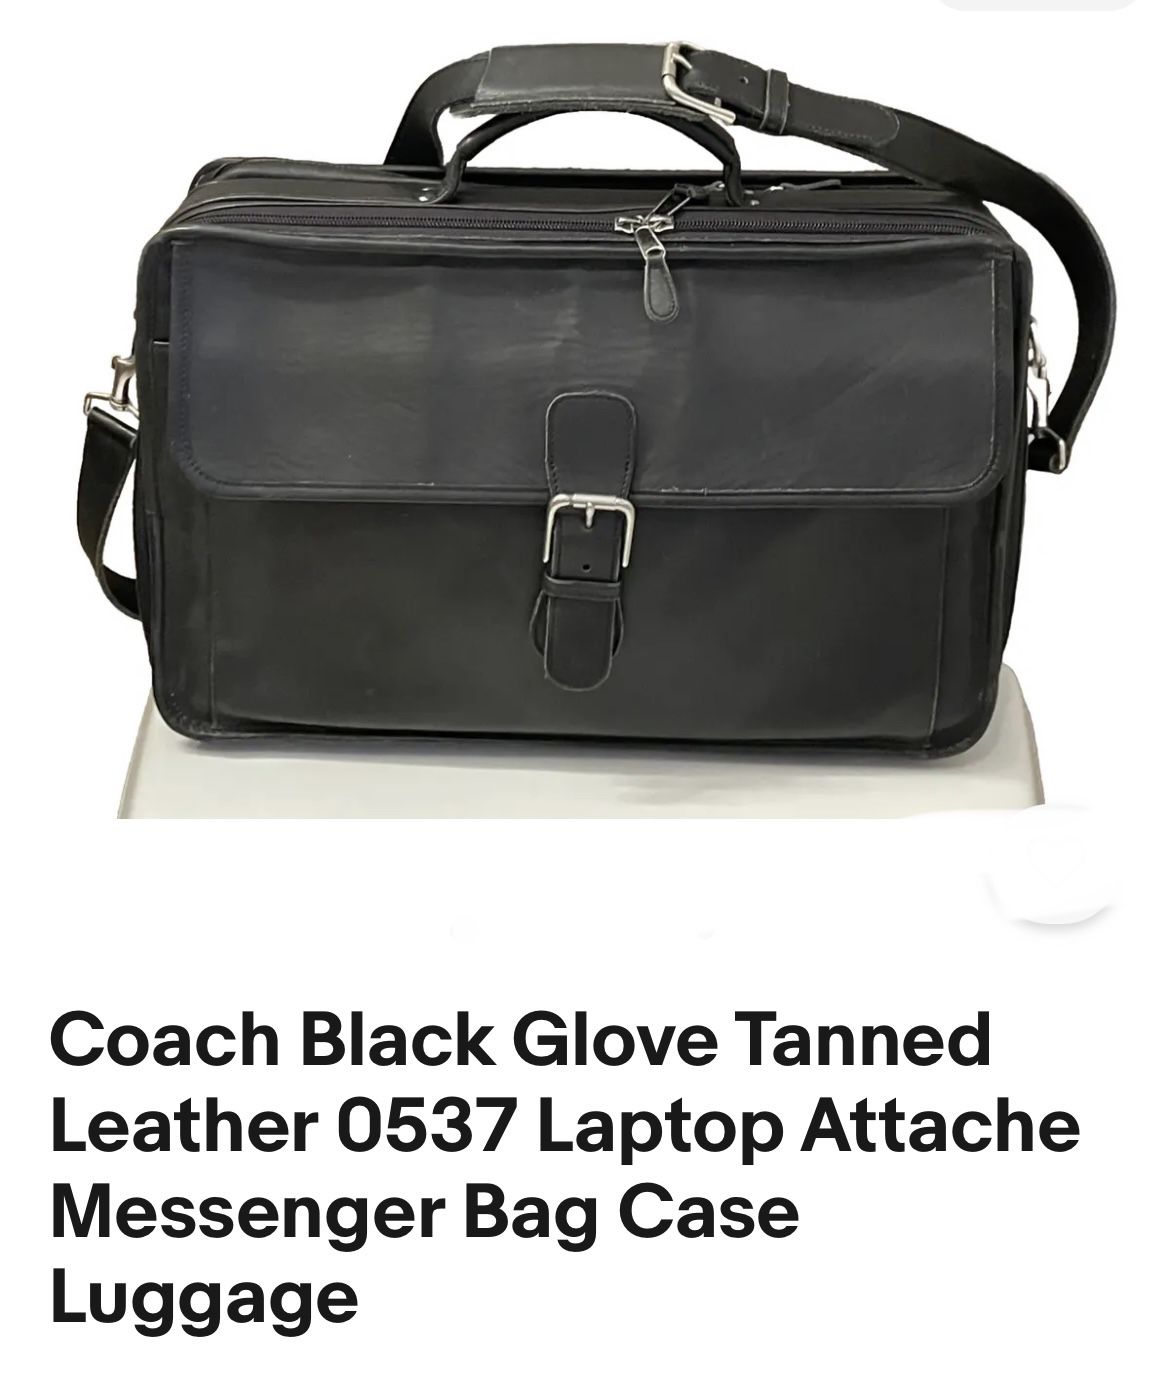 Coach Black Glove Tanned Leather 0537 Laptop Attache Messenger Bag Case Luggage